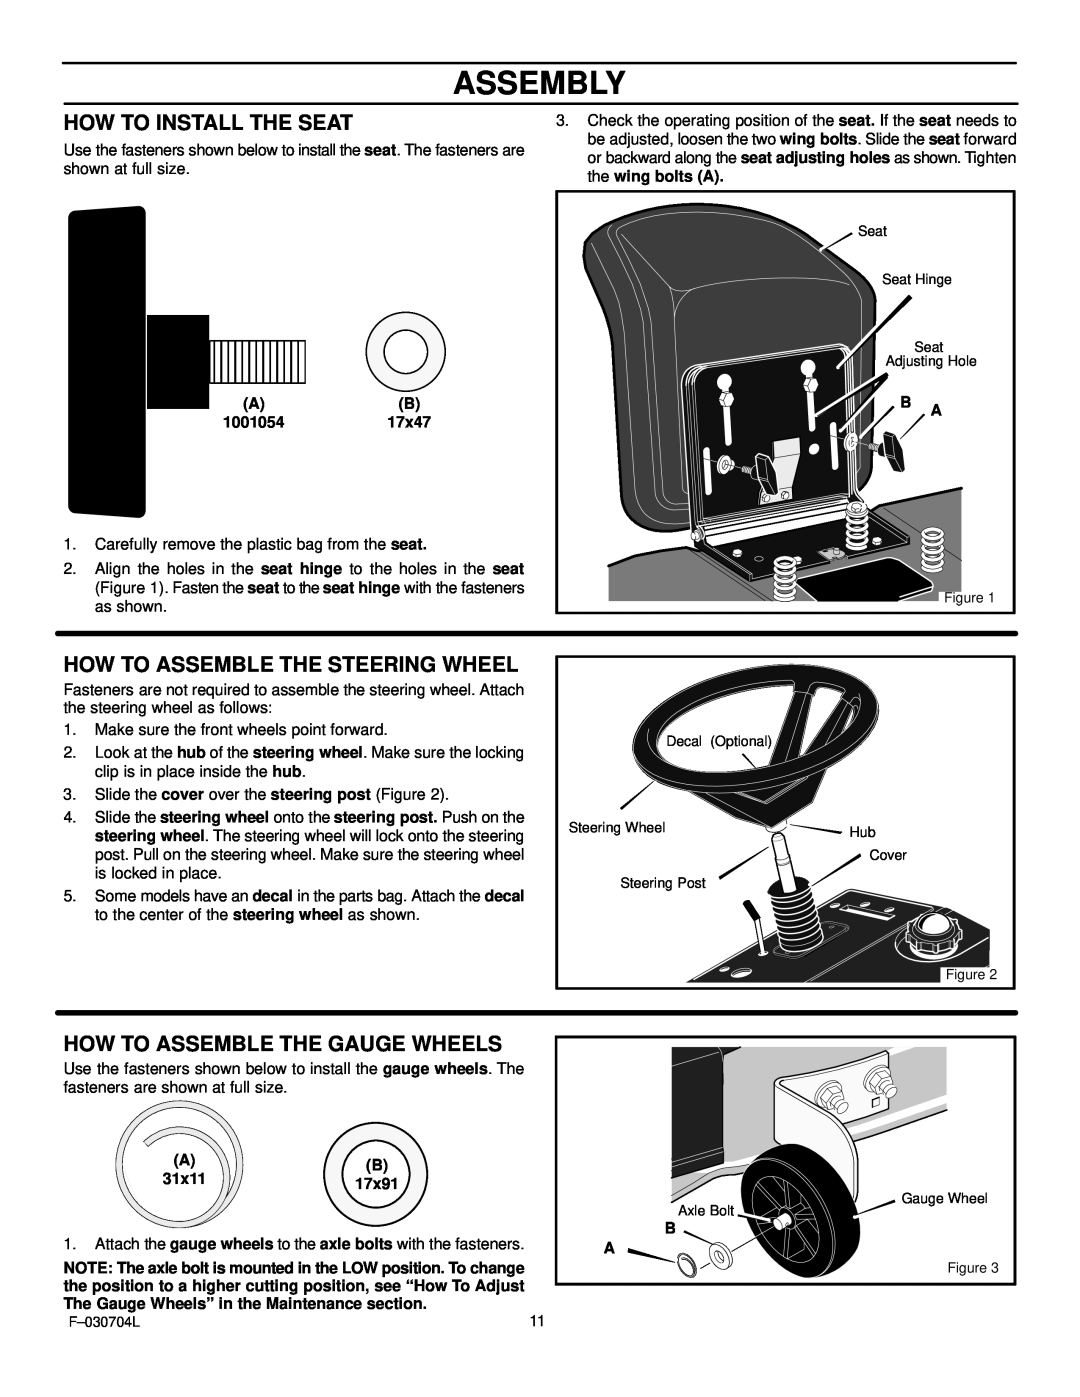 Murray 425303x92B Assembly, How To Install The Seat, How To Assemble The Steering Wheel, How To Assemble The Gauge Wheels 